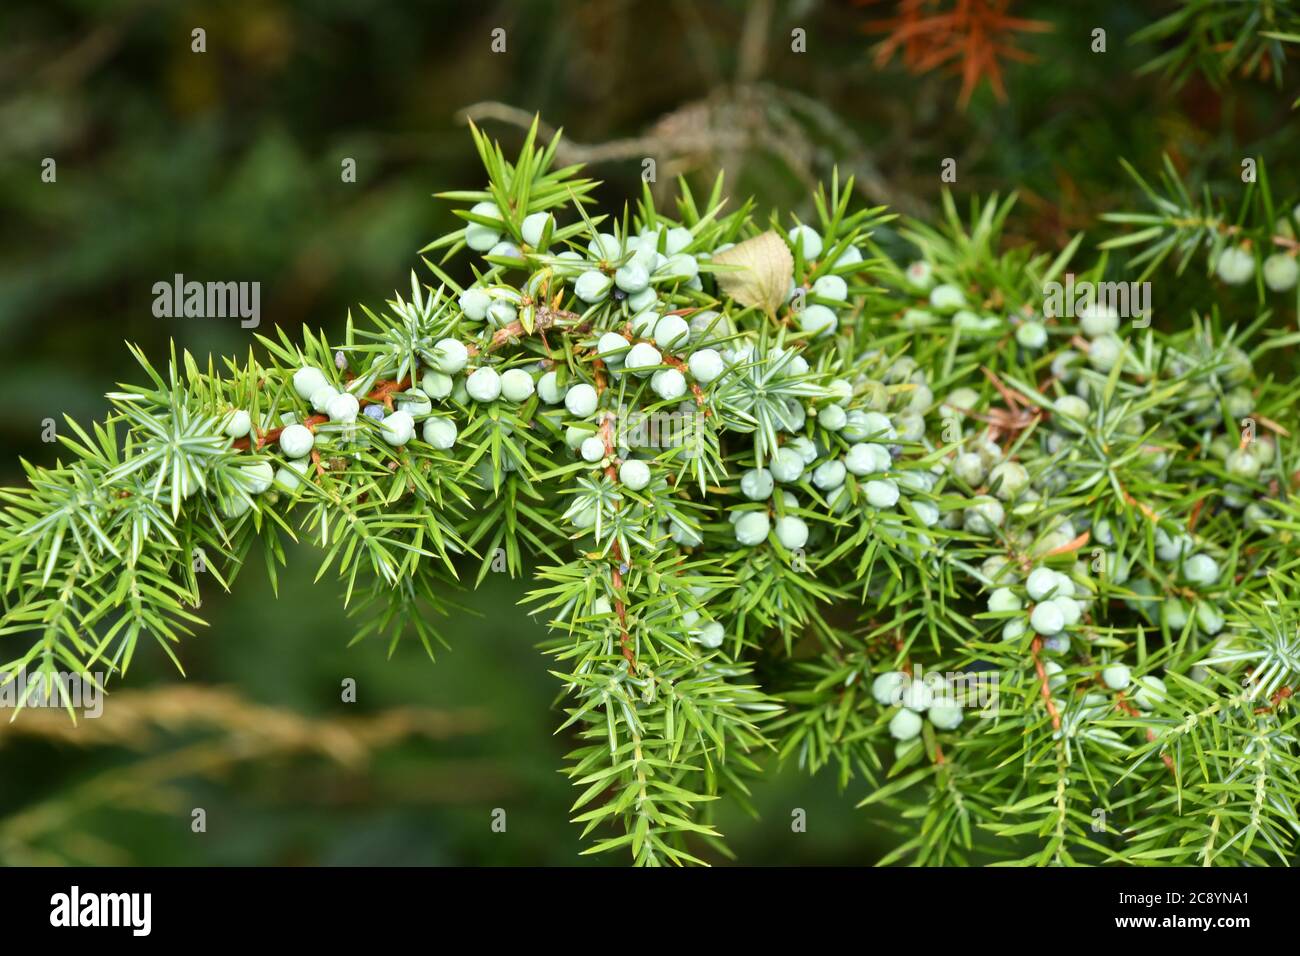 Branch of a Juniper tree'(Juniperus communis) heavily laden with green berries.One of three native evergreen conifers  it thrives on chalk lowland, mo Stock Photo